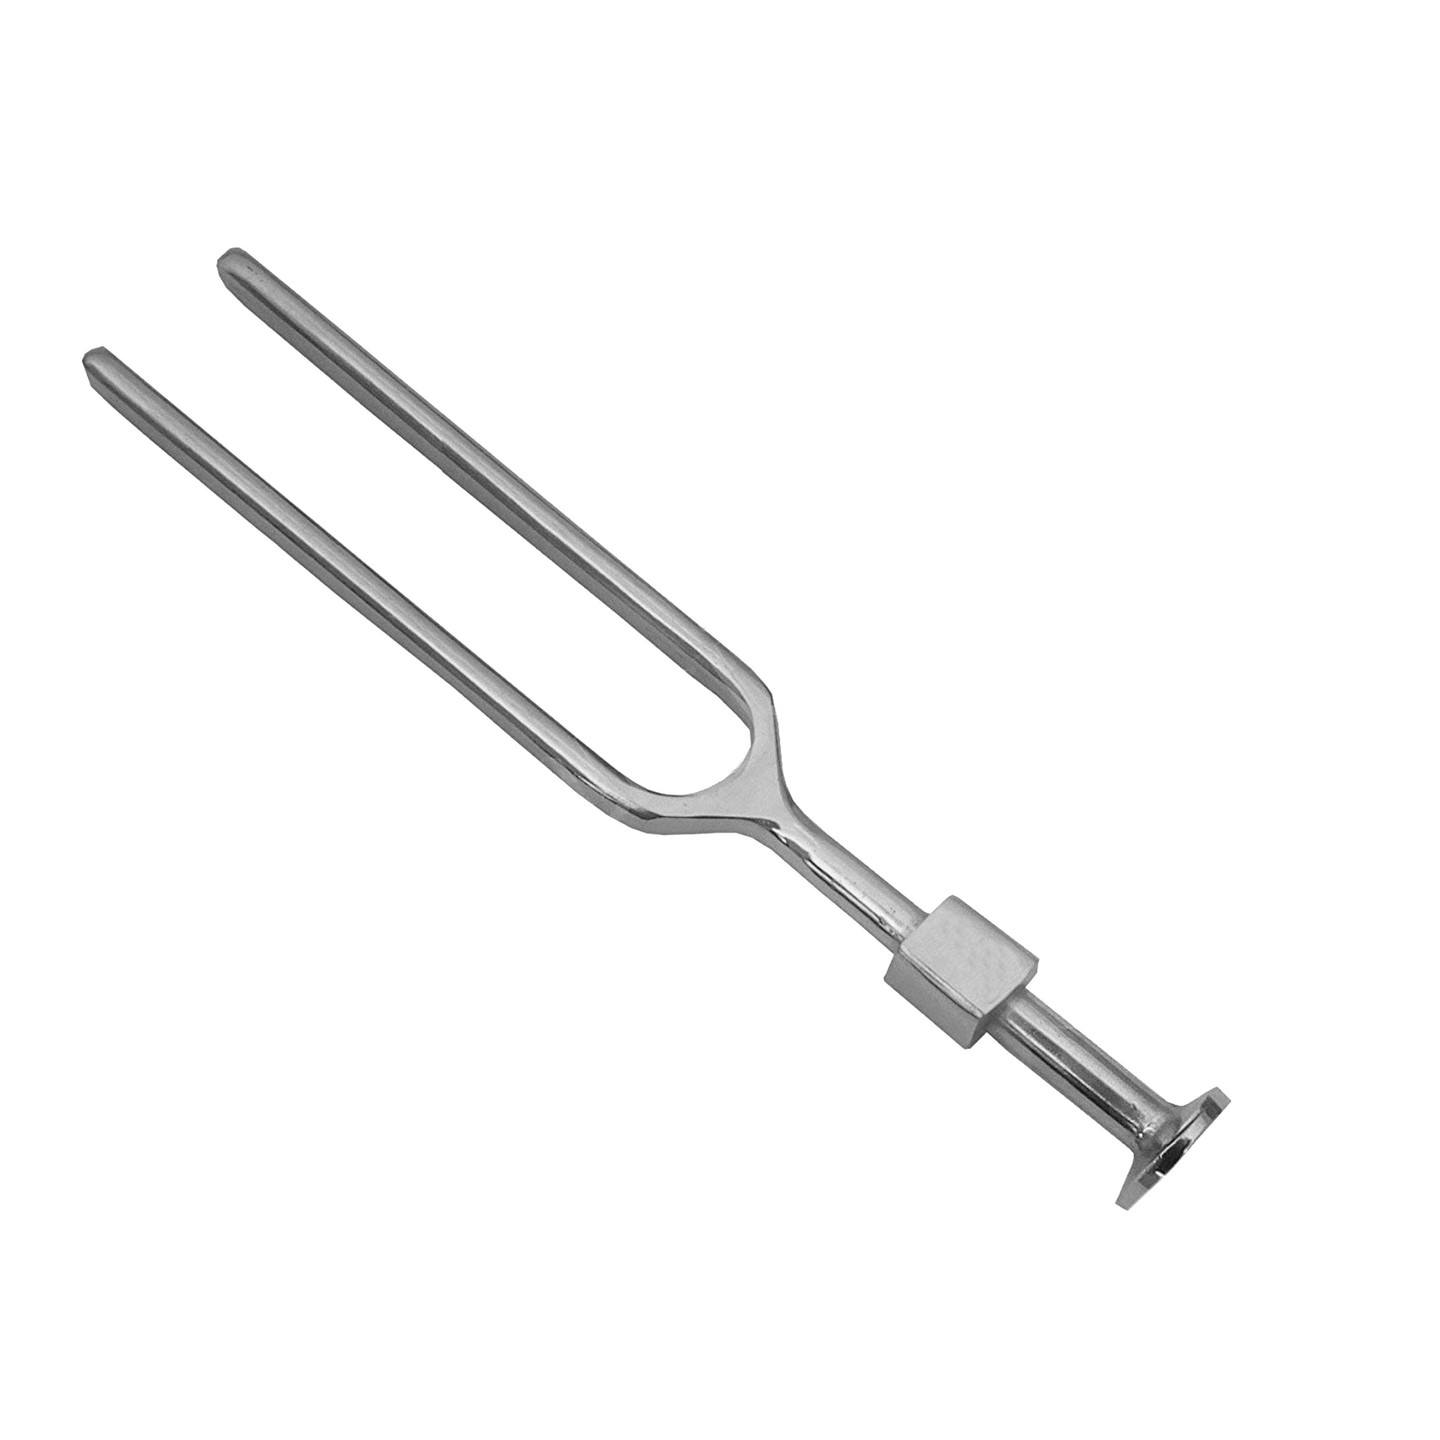 Vkare Stainless Steel Tuning Fork - 256MHz